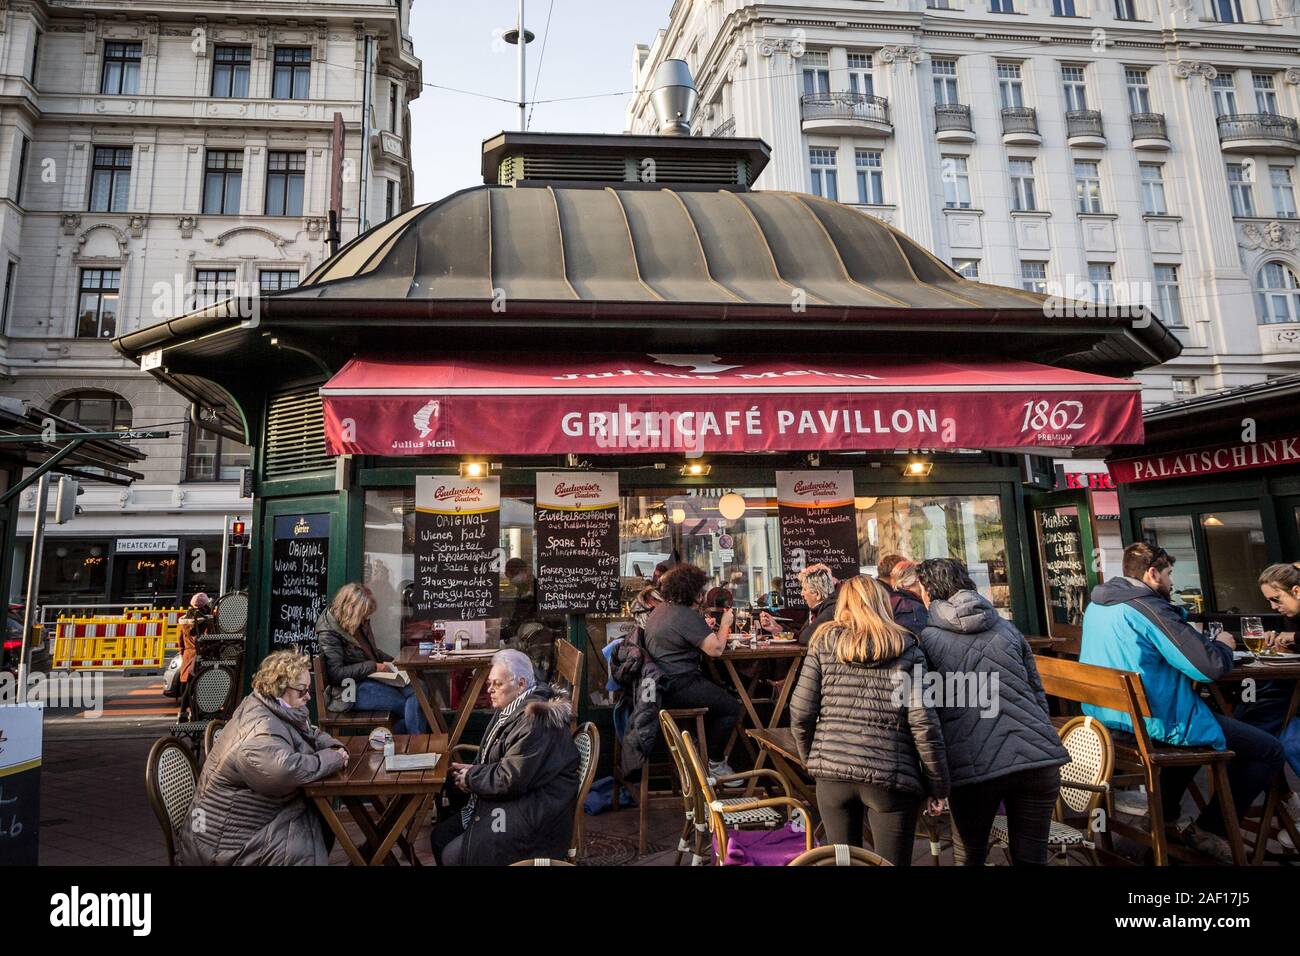 VIENNA, AUSTRIA - NOVEMBER 6, 2019: People sitting and drinking on the outdoor terrace of the grill cafe pavillon in winter in Naschmarkt, one of the Stock Photo